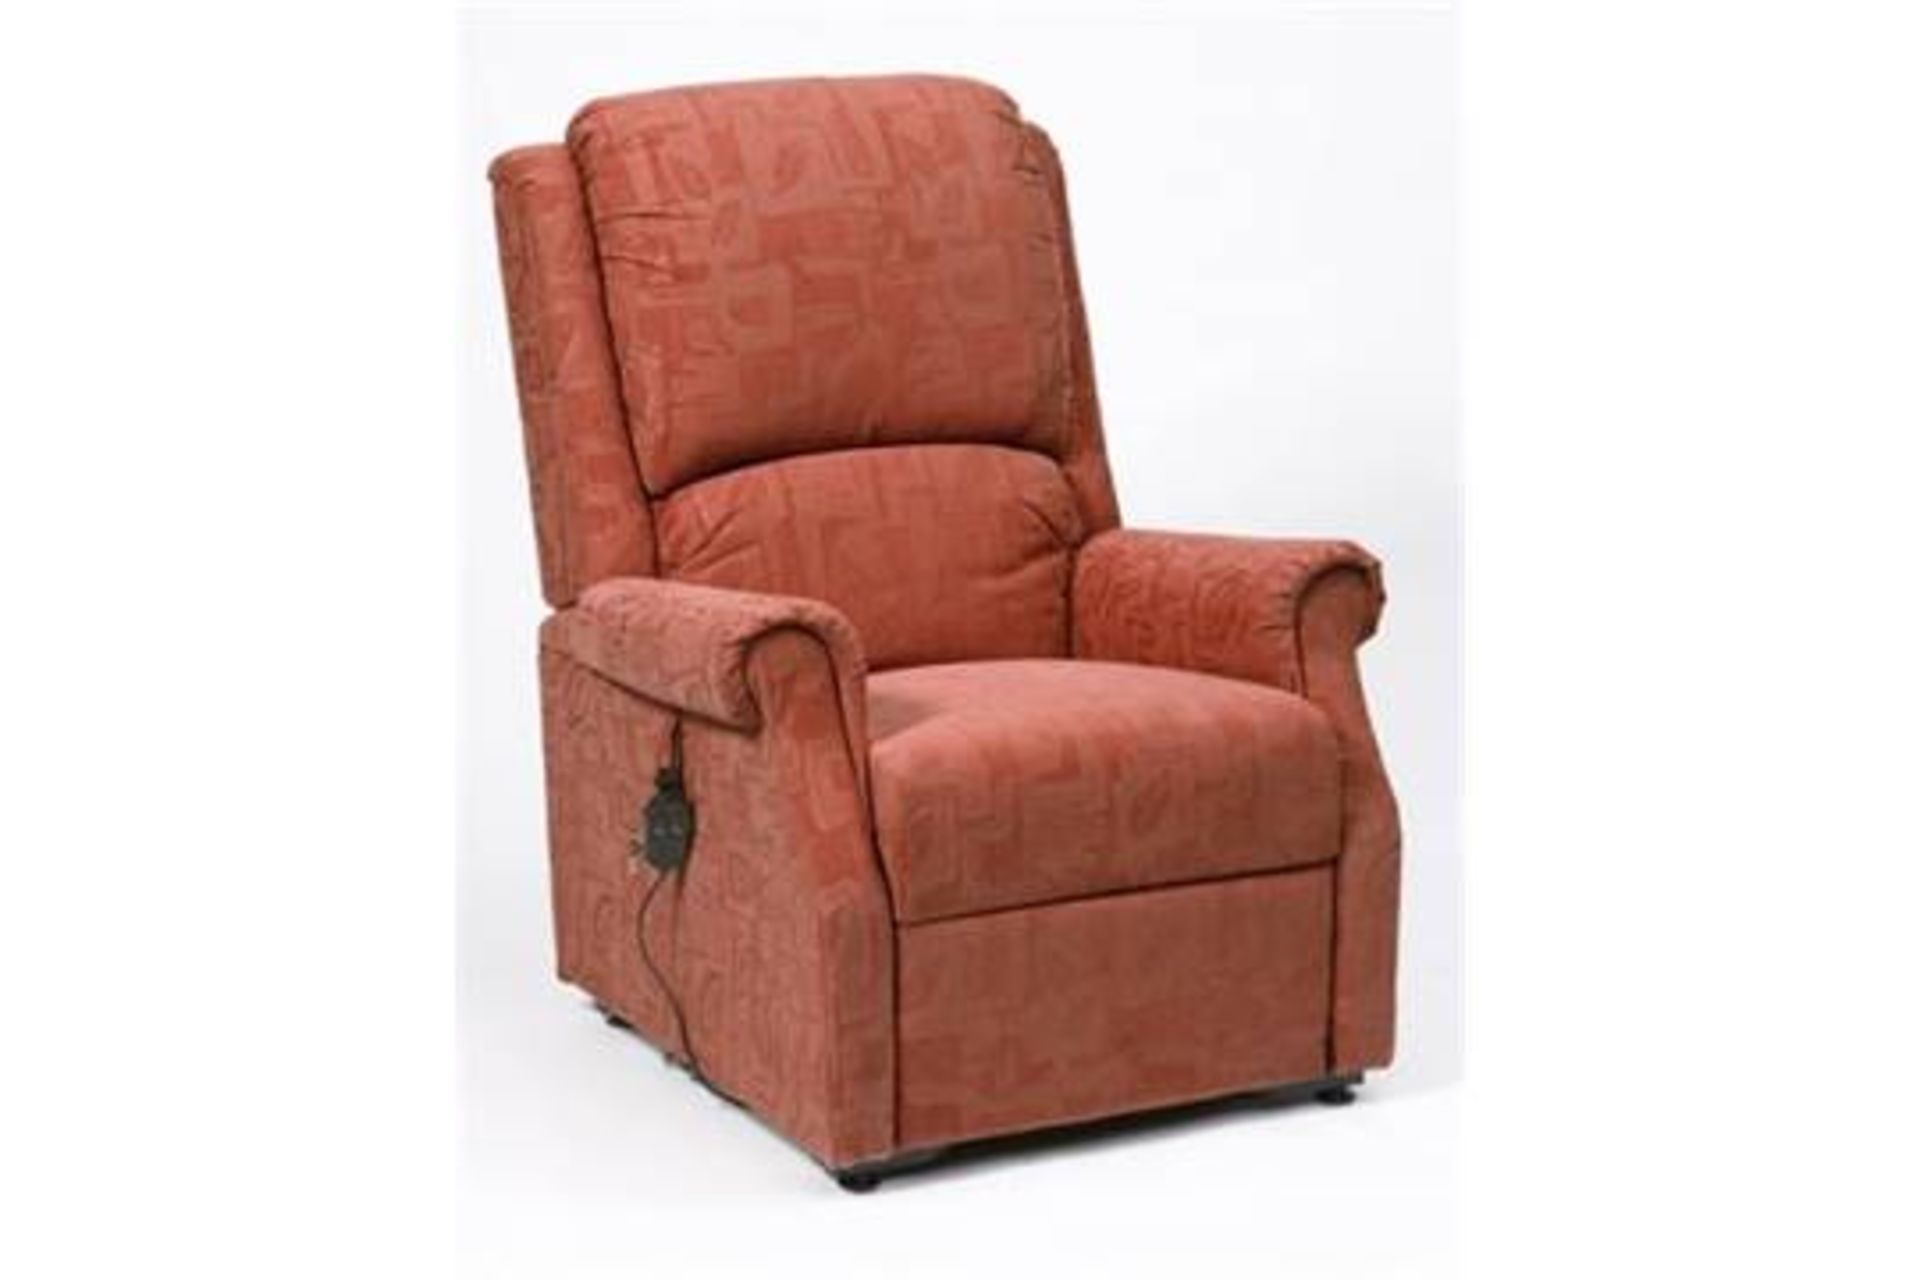 V  Grade A Red Velour Rise & Recline Electric Chair With Remote Control Brand New In Box RRP £999 X